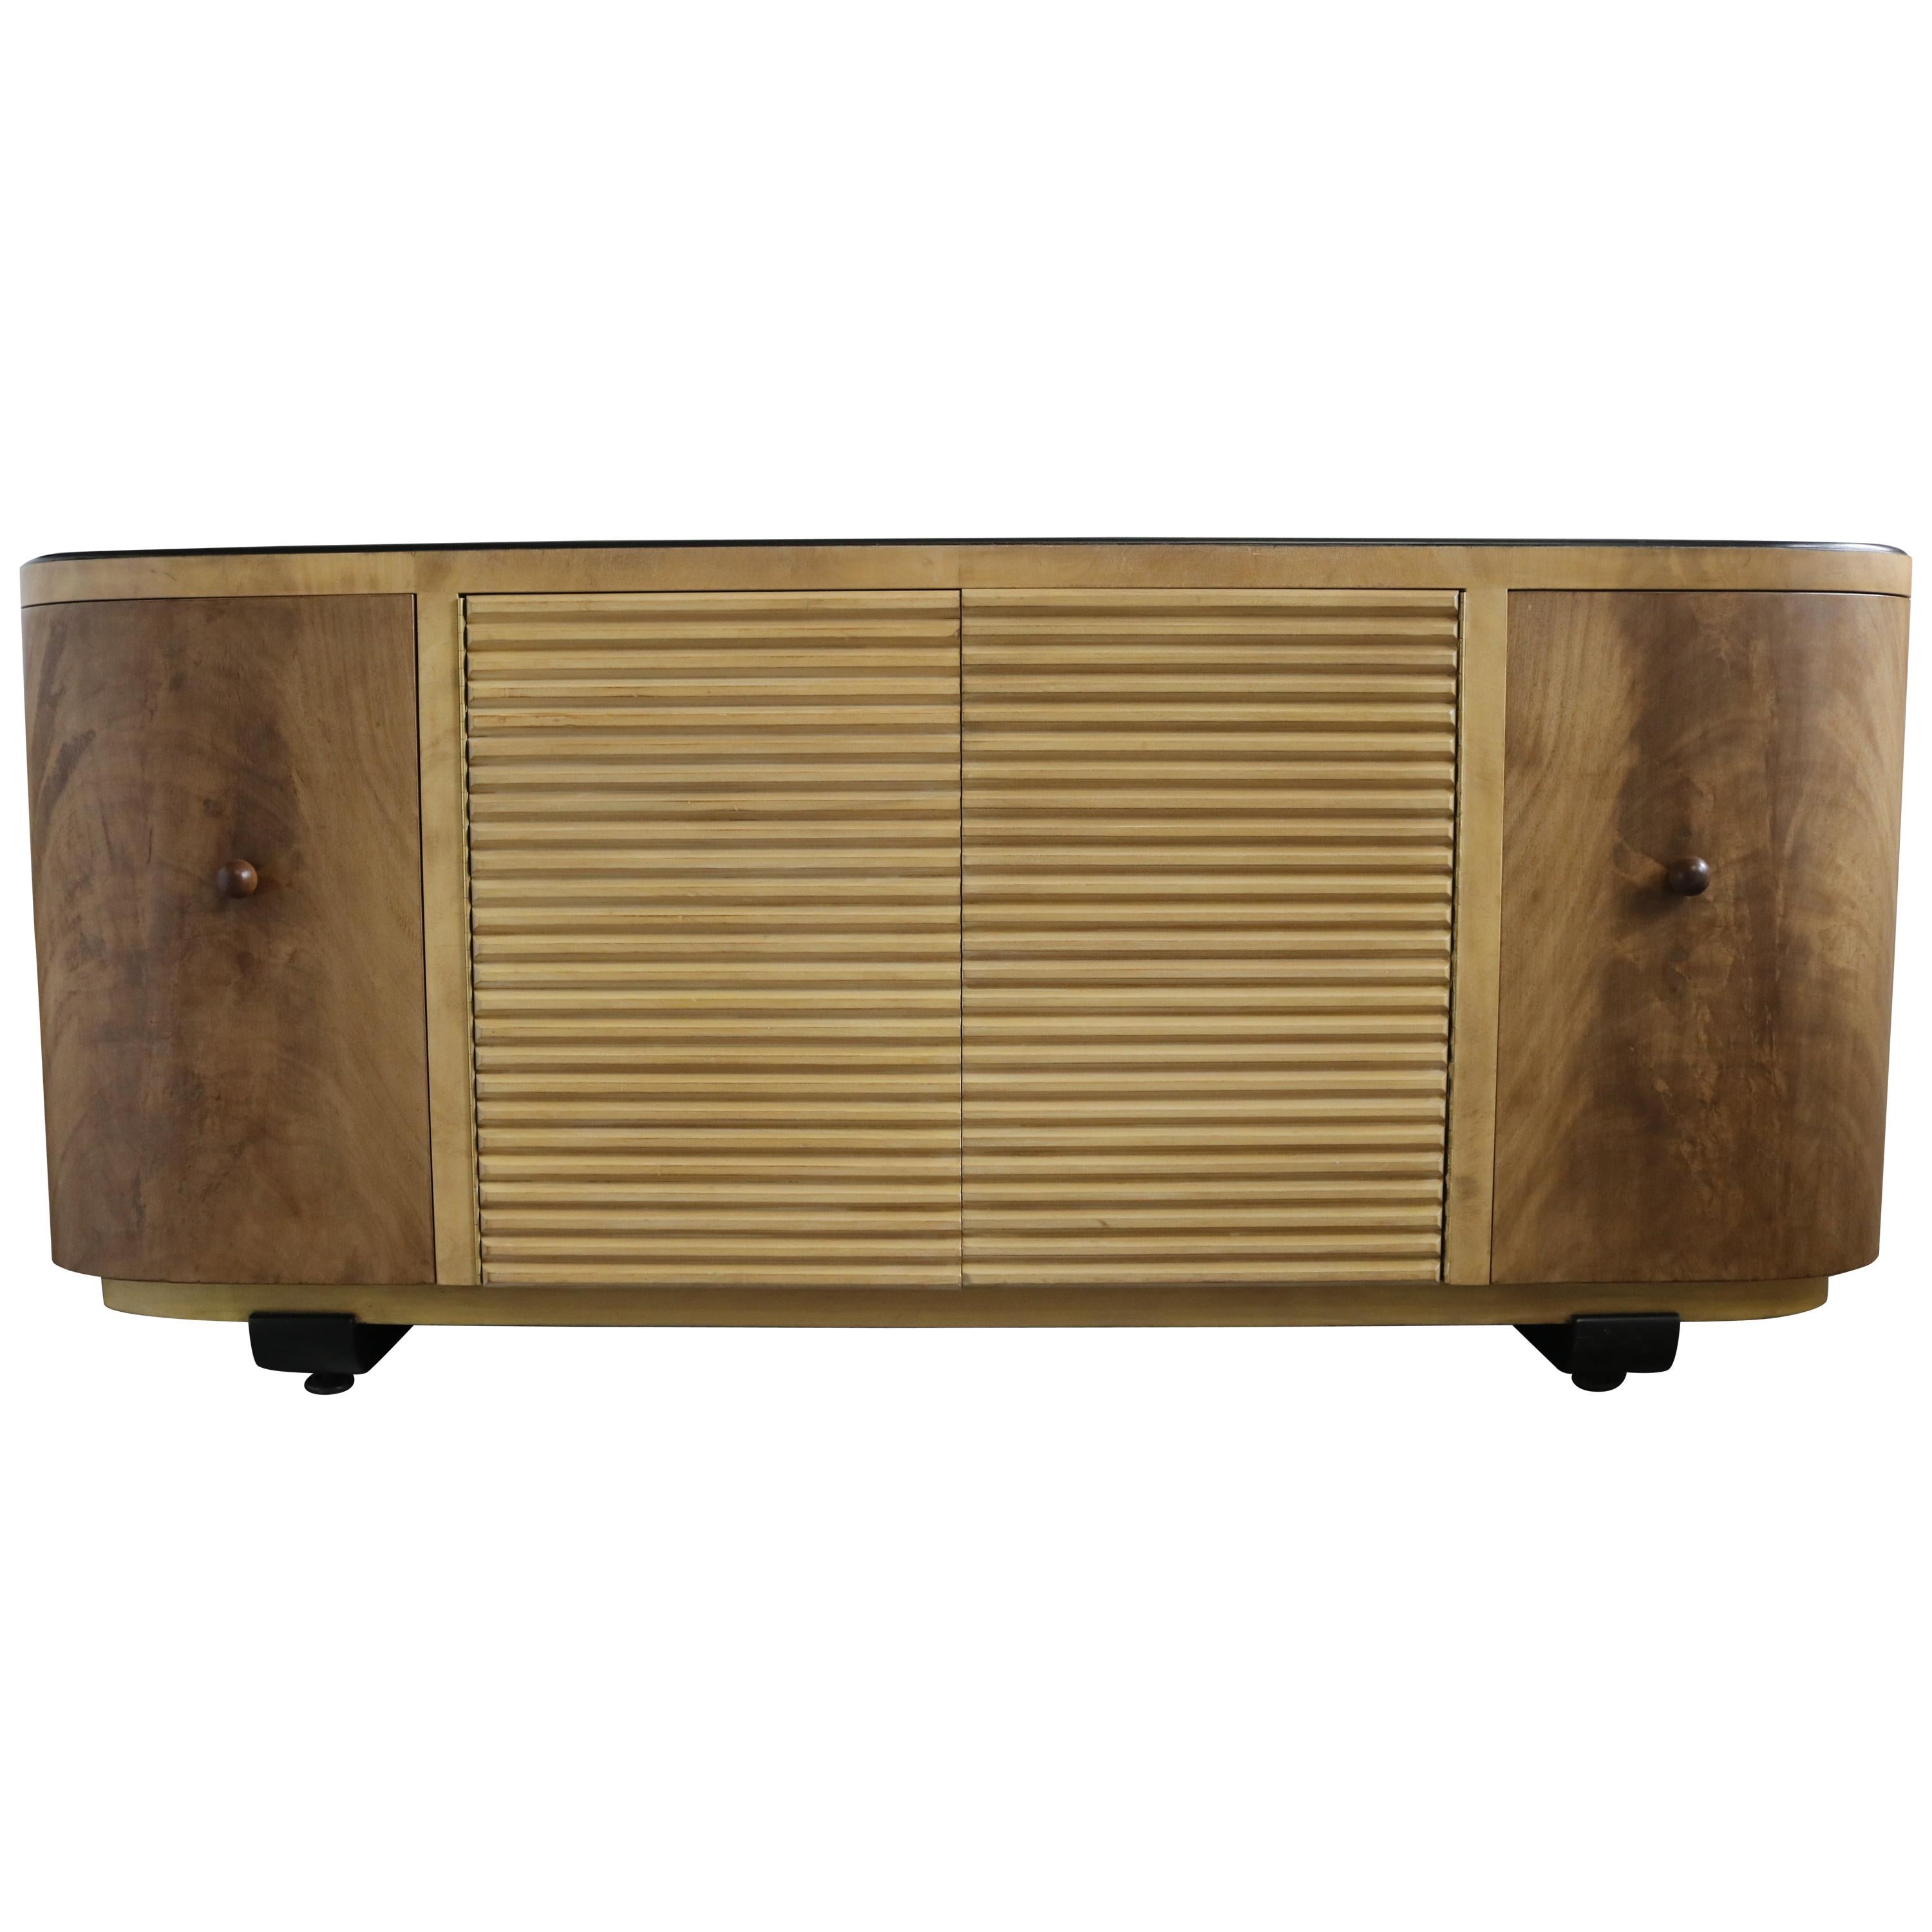 Two-Toned Credenza by Paul Frankl